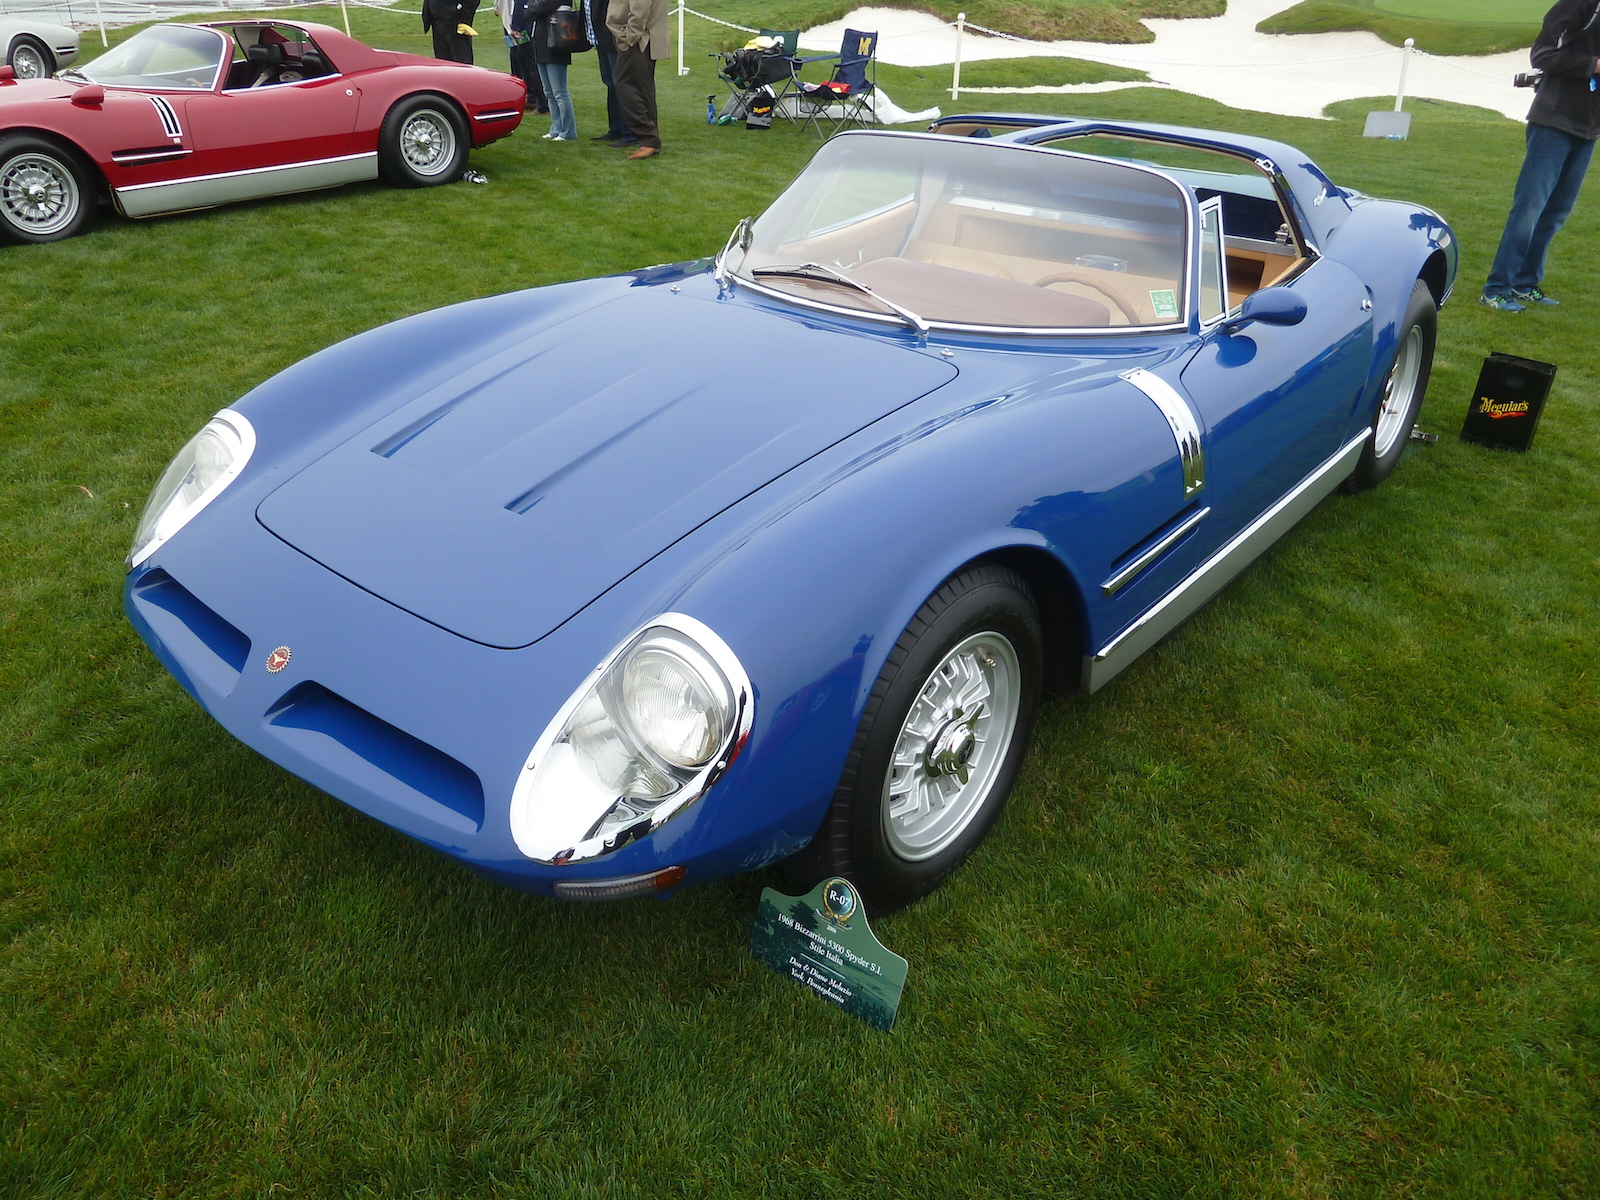 The Bizzarrini Class At Pebble Beach Was Awesome – Part 2